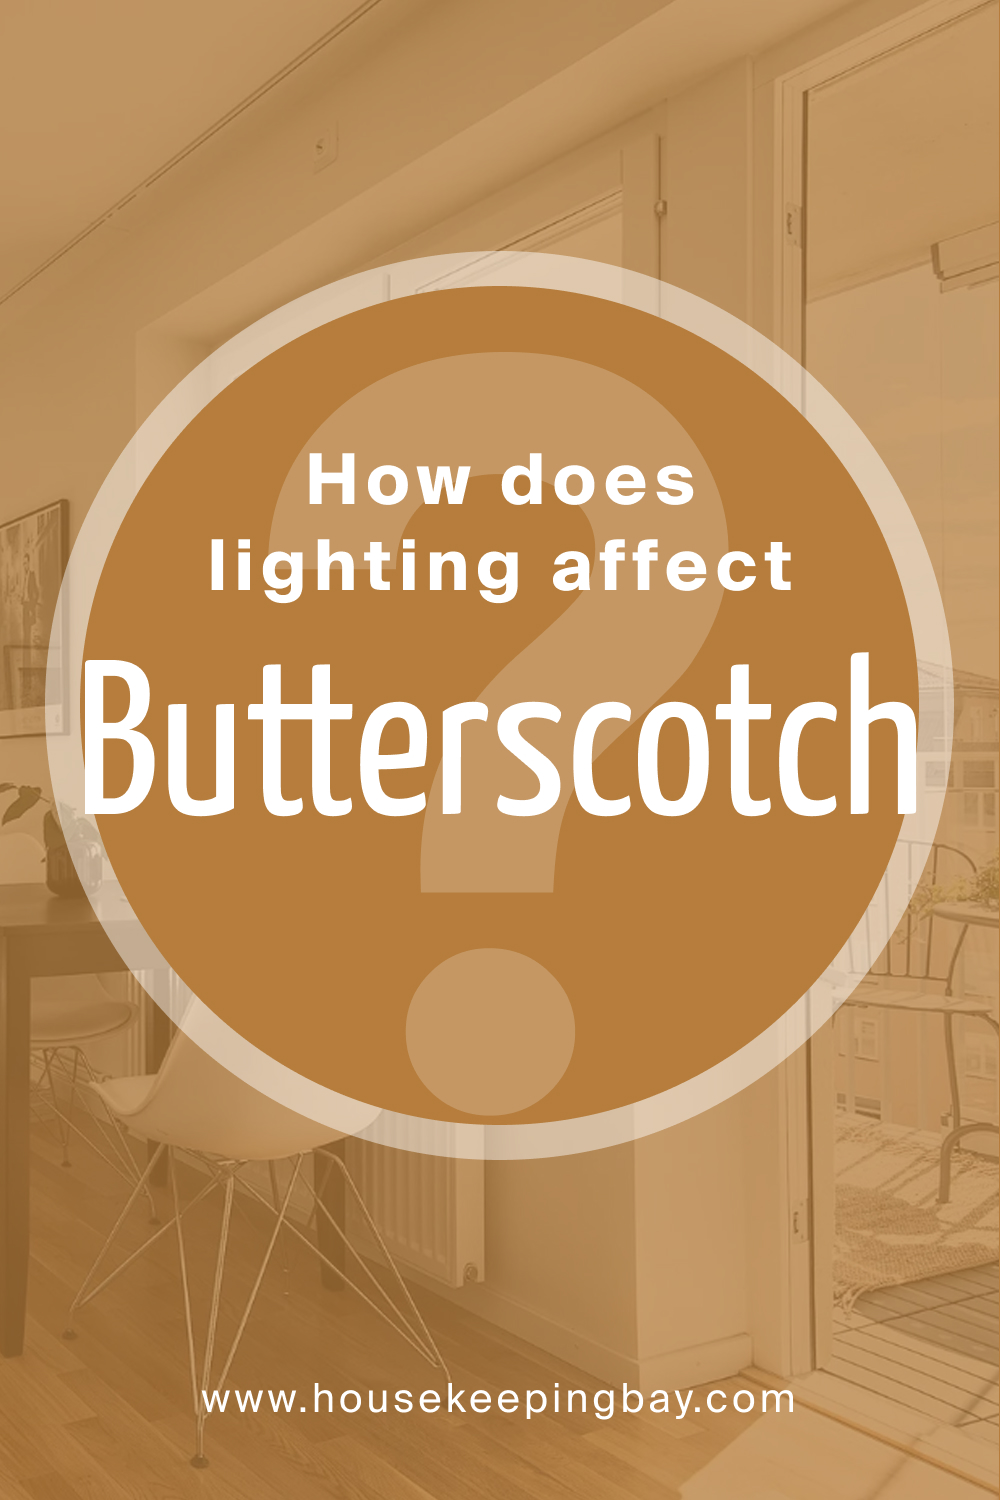 How does lighting affect SW 6377 Butterscotch